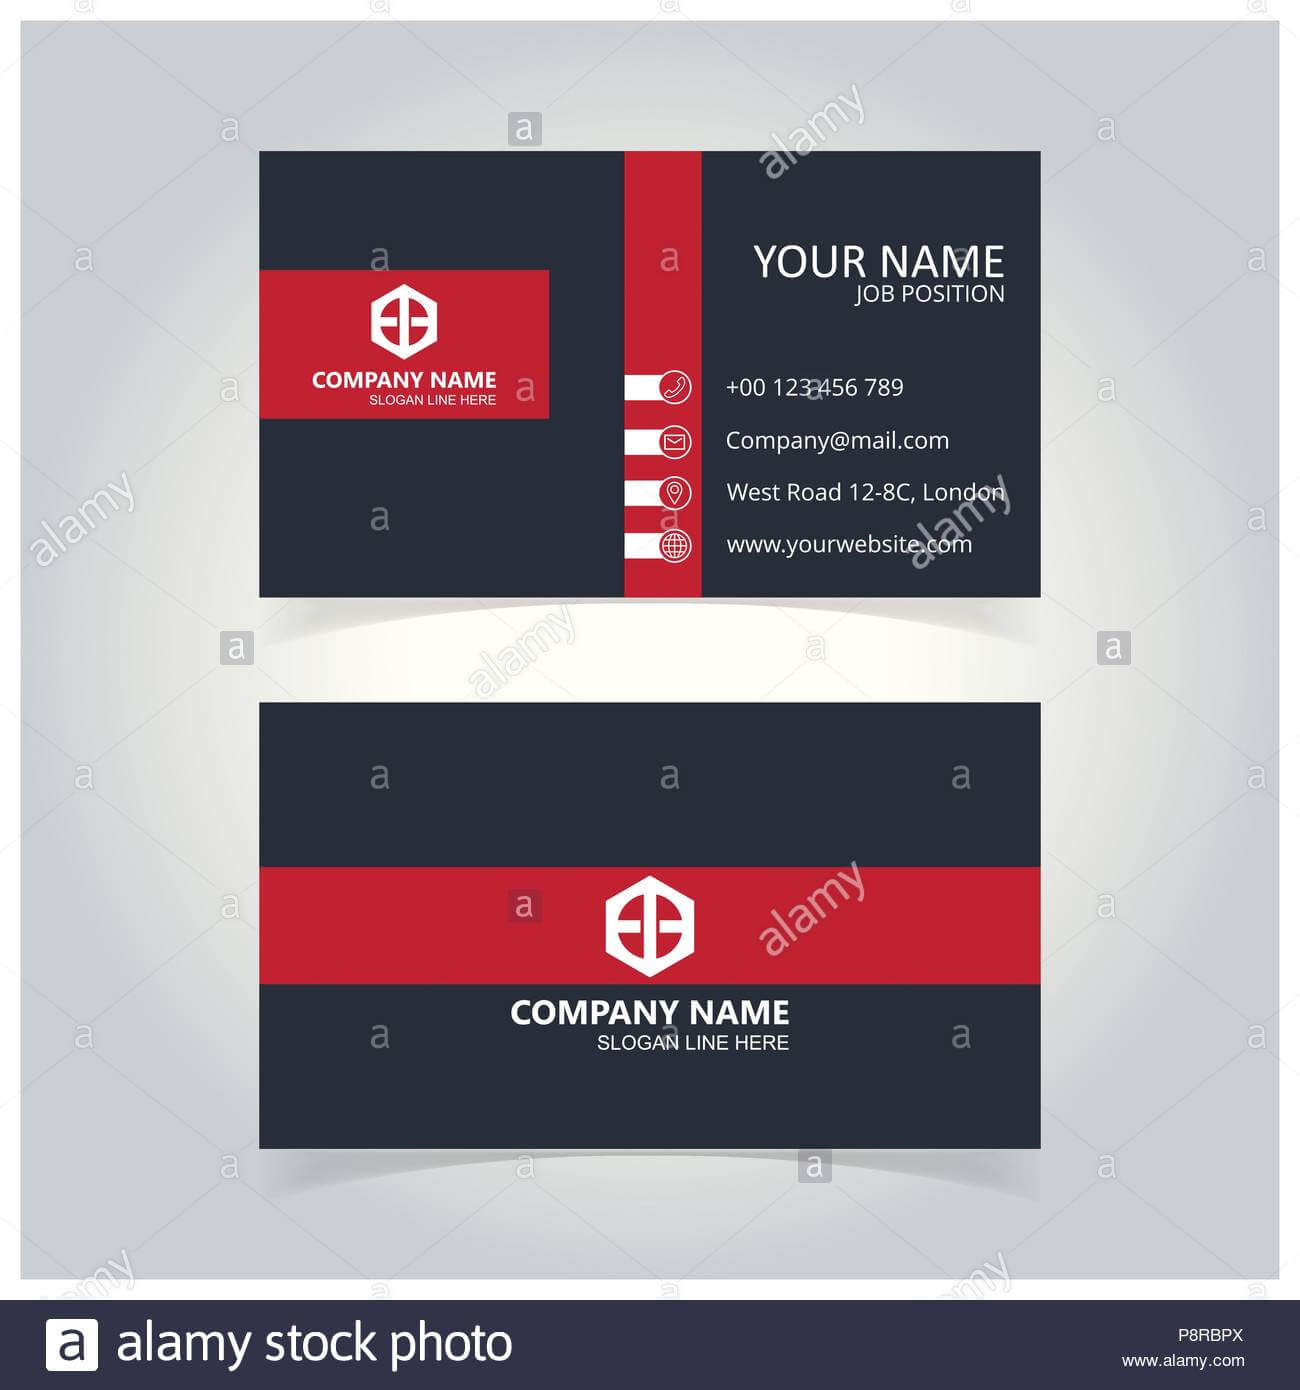 Gray And Red Business Card Template. For Web Design And With Regard To Web Design Business Cards Templates